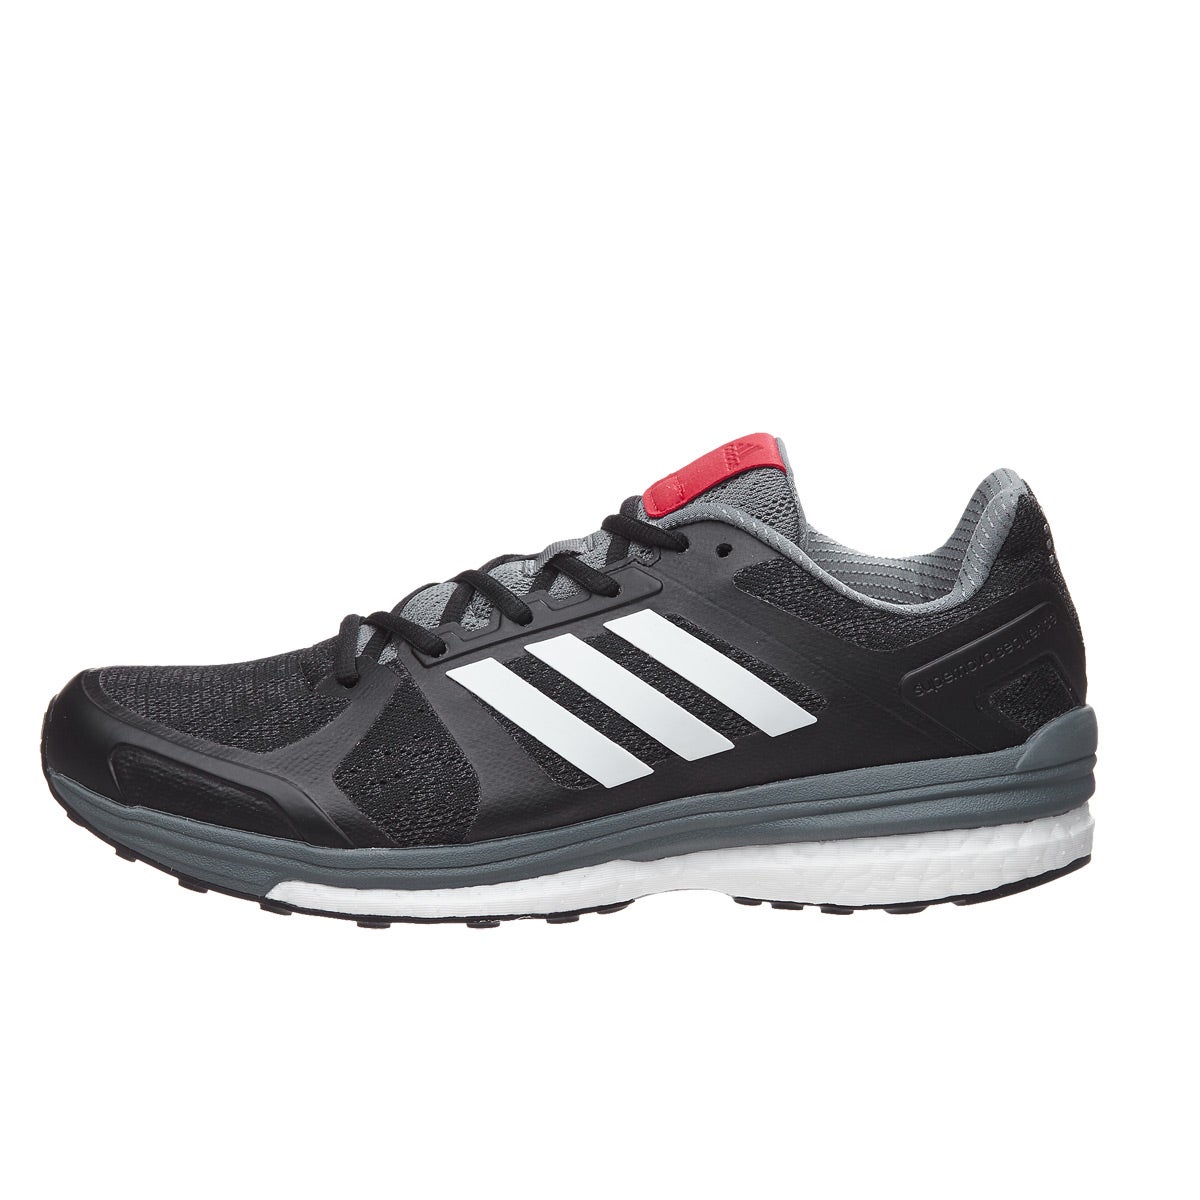 adidas Supernova Sequence 9 Men's Shoes Black/White 360° View | Running ...